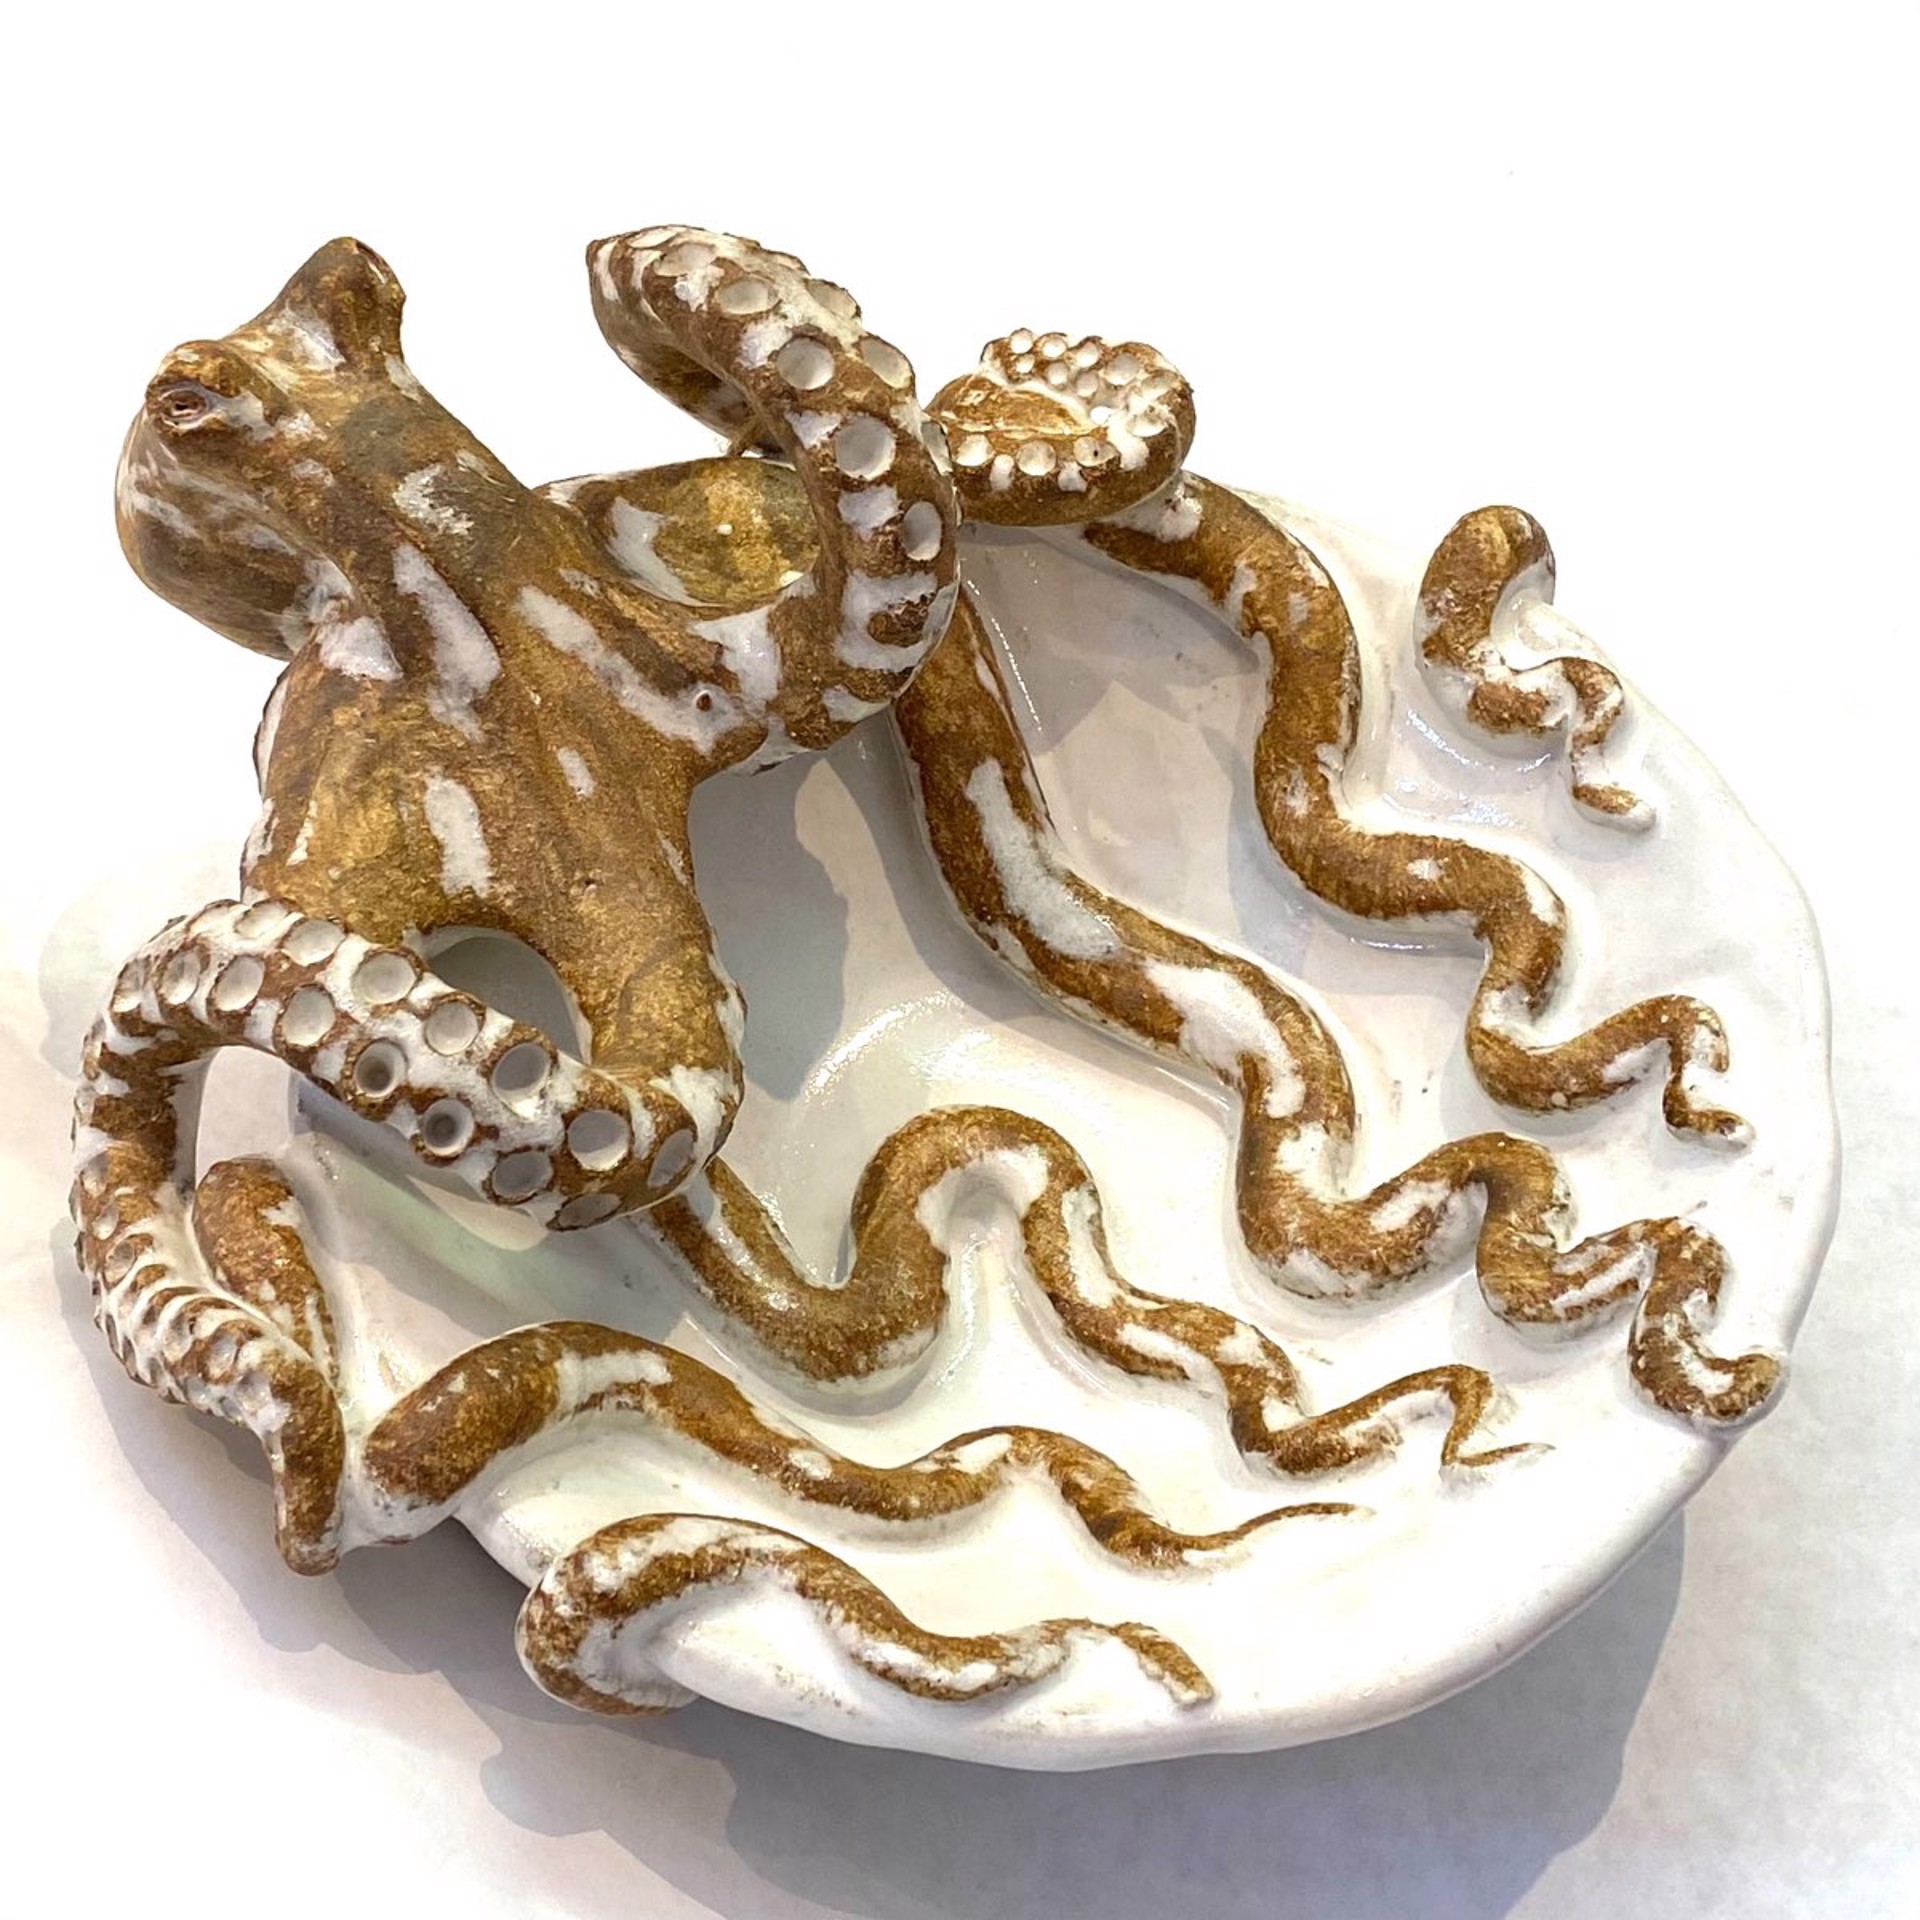 SG22-102 Small Octopus Bowl (White) by Shayne Greco